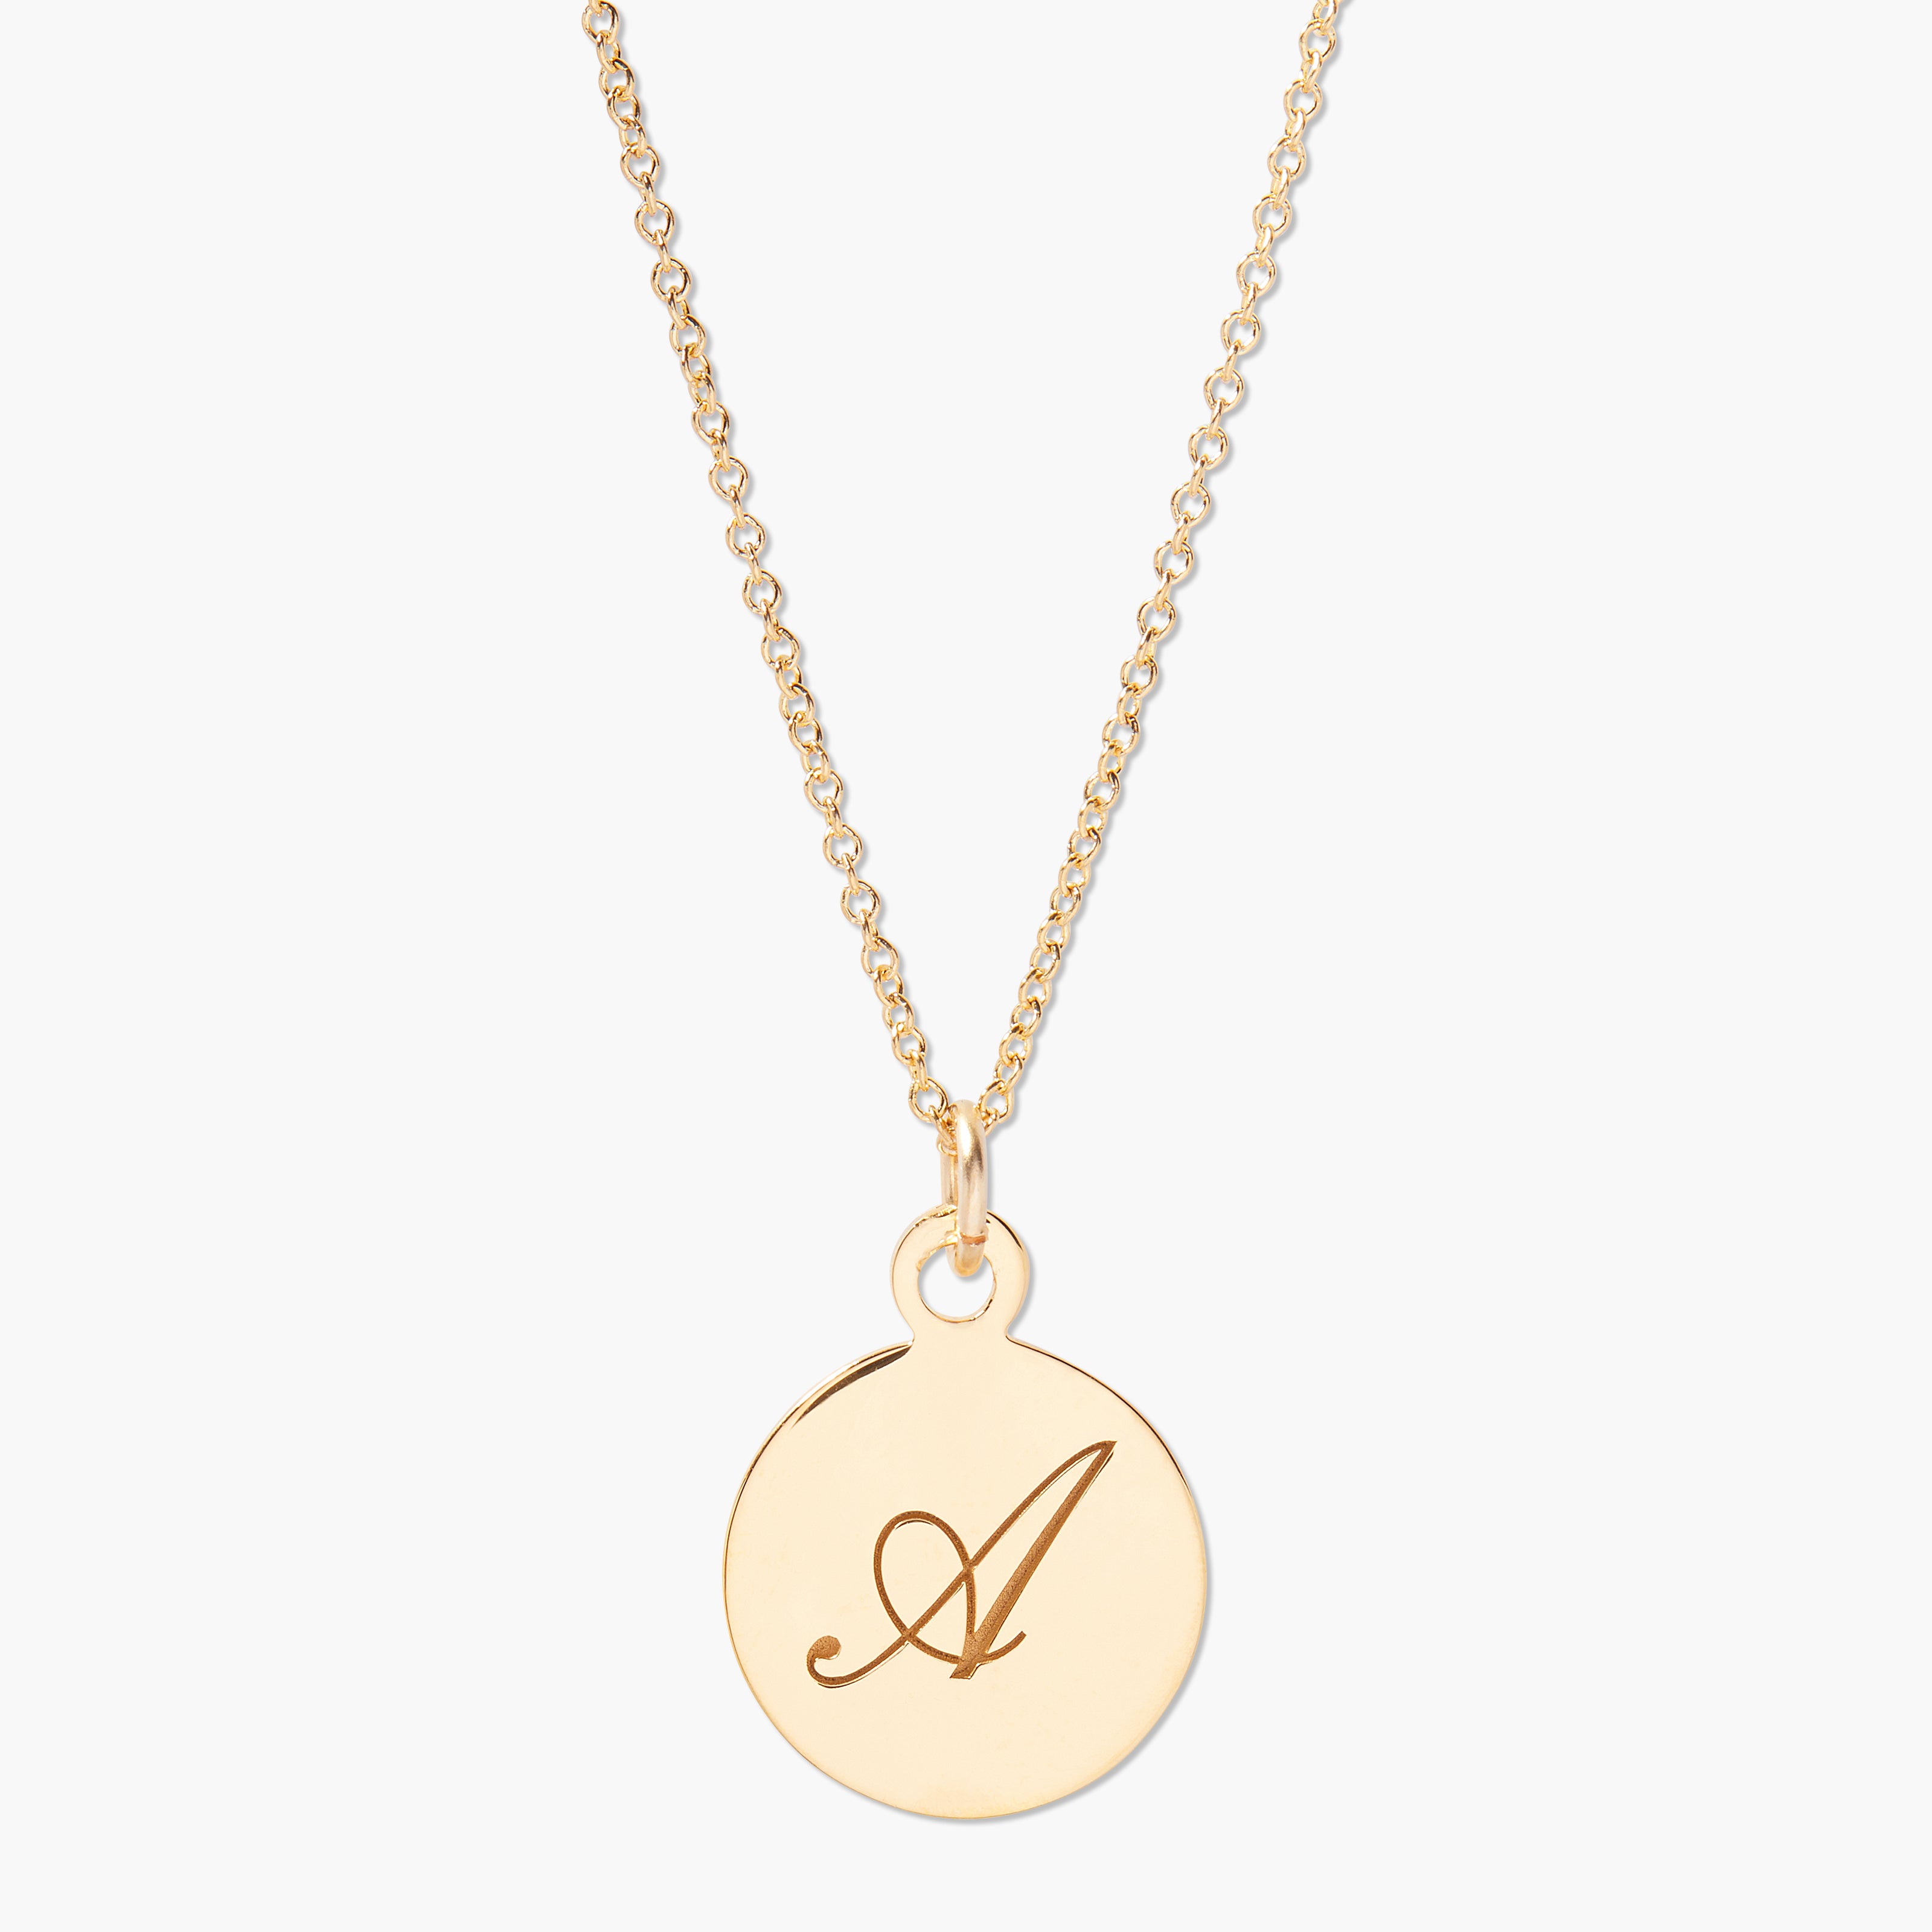 Personalised Silver & 9ct Gold Family Heart Necklace | Posh Totty Designs